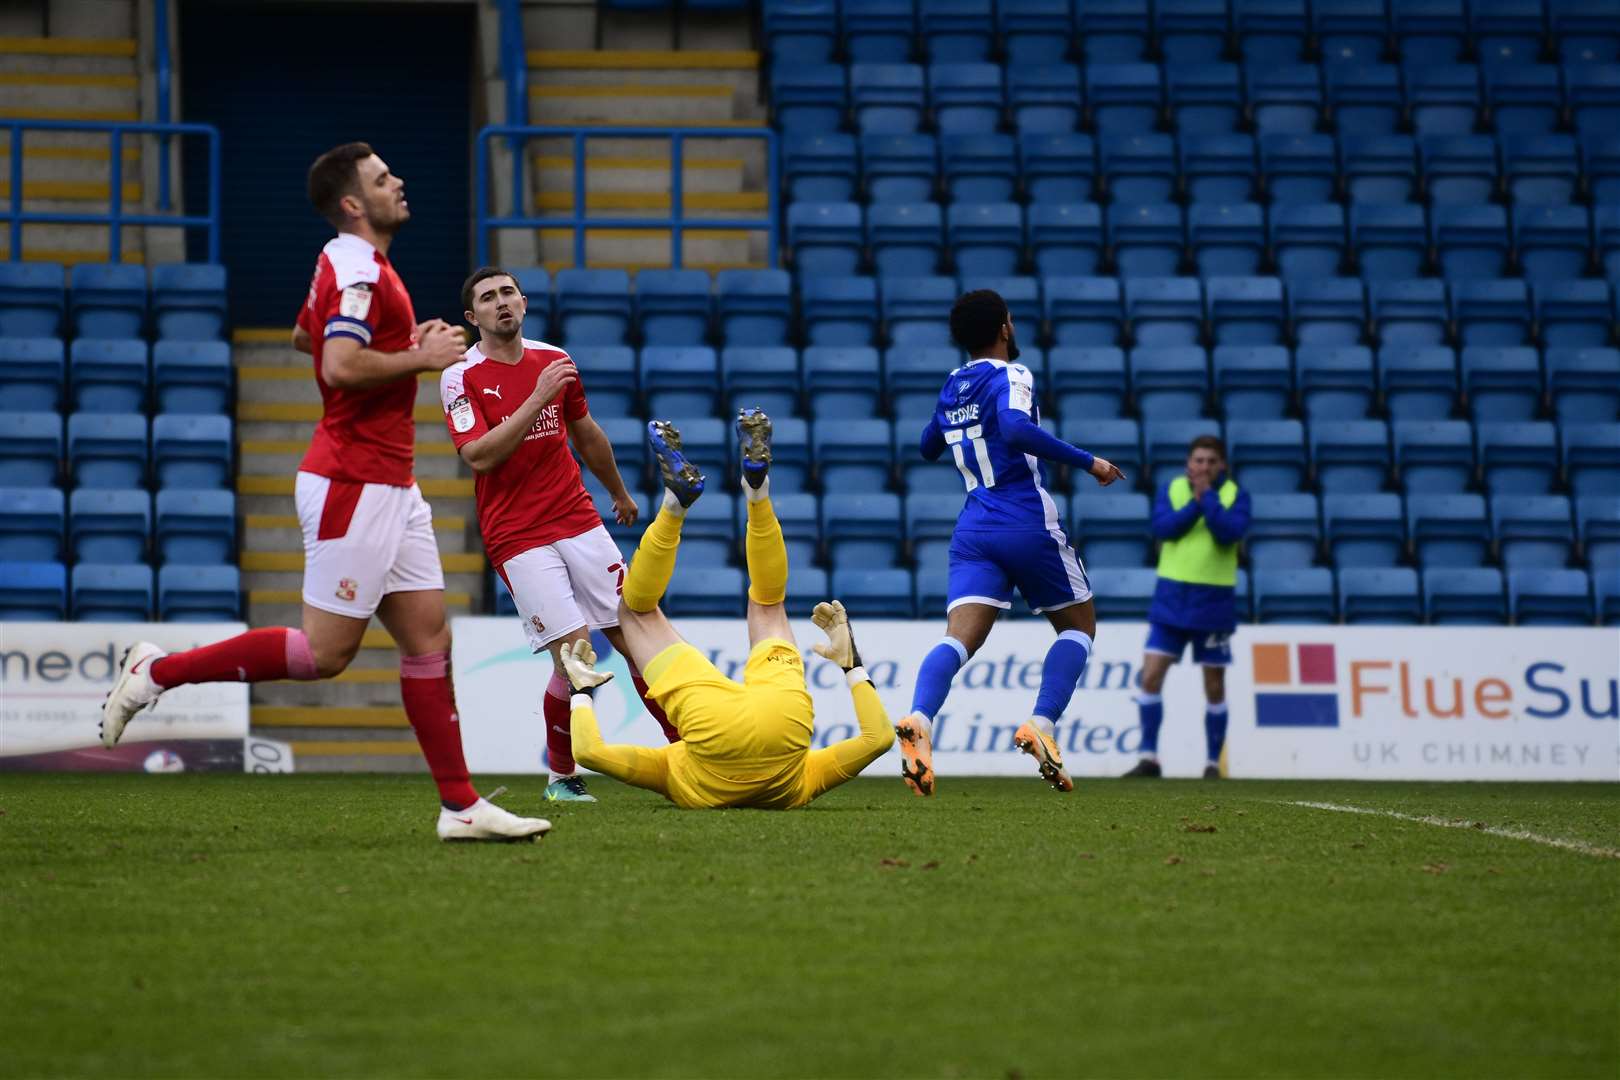 Trae Coyle seals with win with Gillingham's second goal Picture: Barry Goodwin